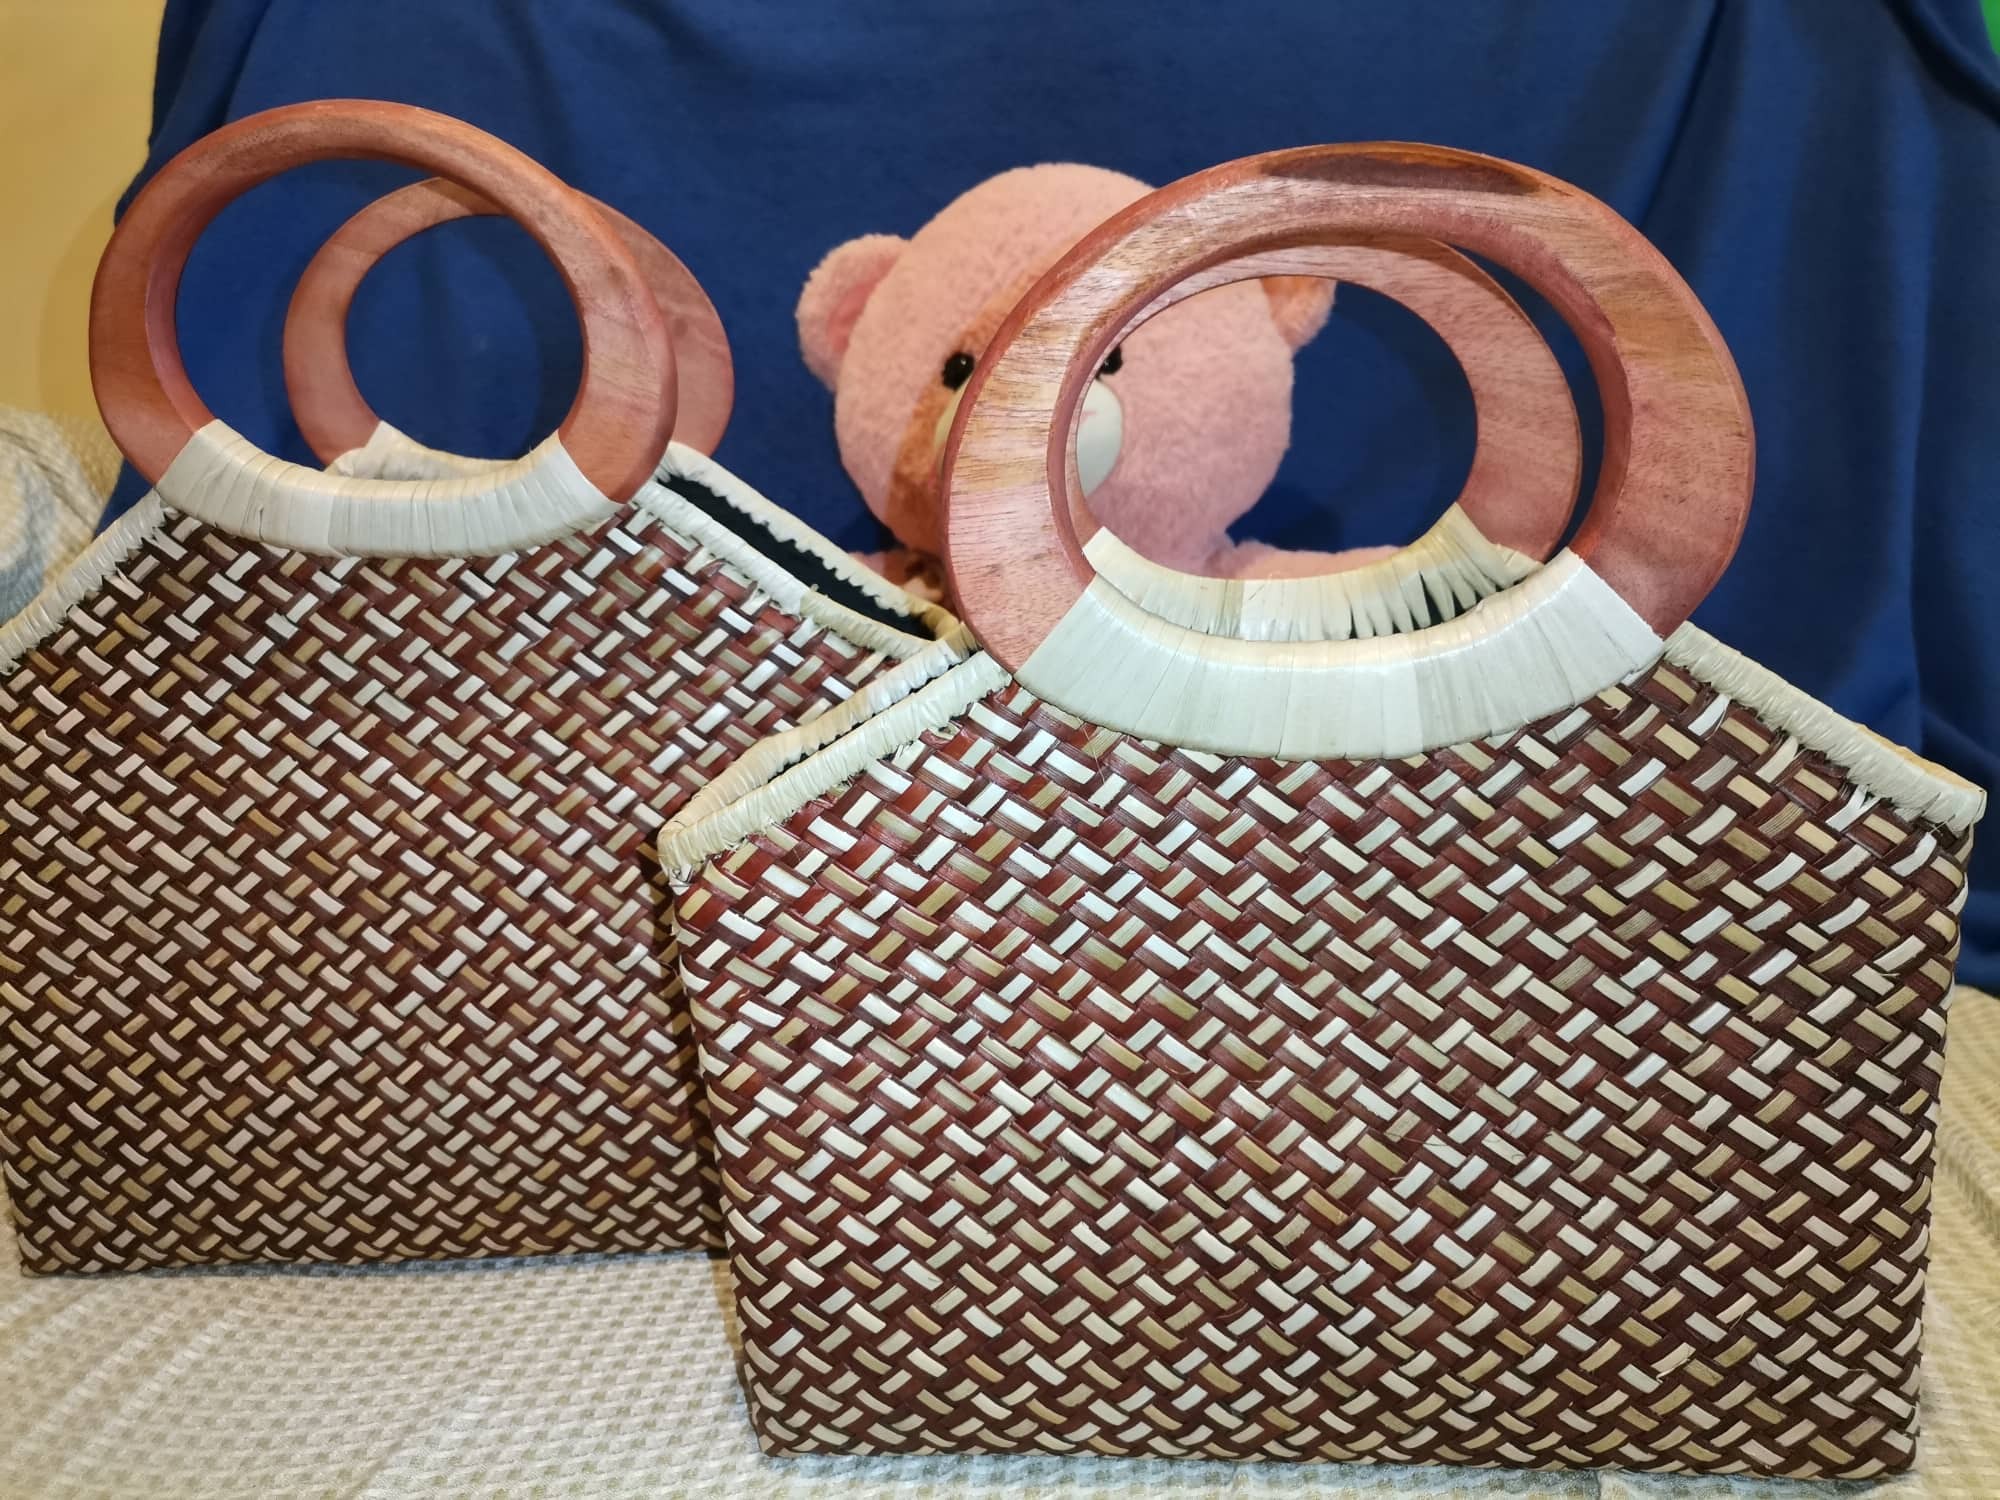 Get your own rattan bag 